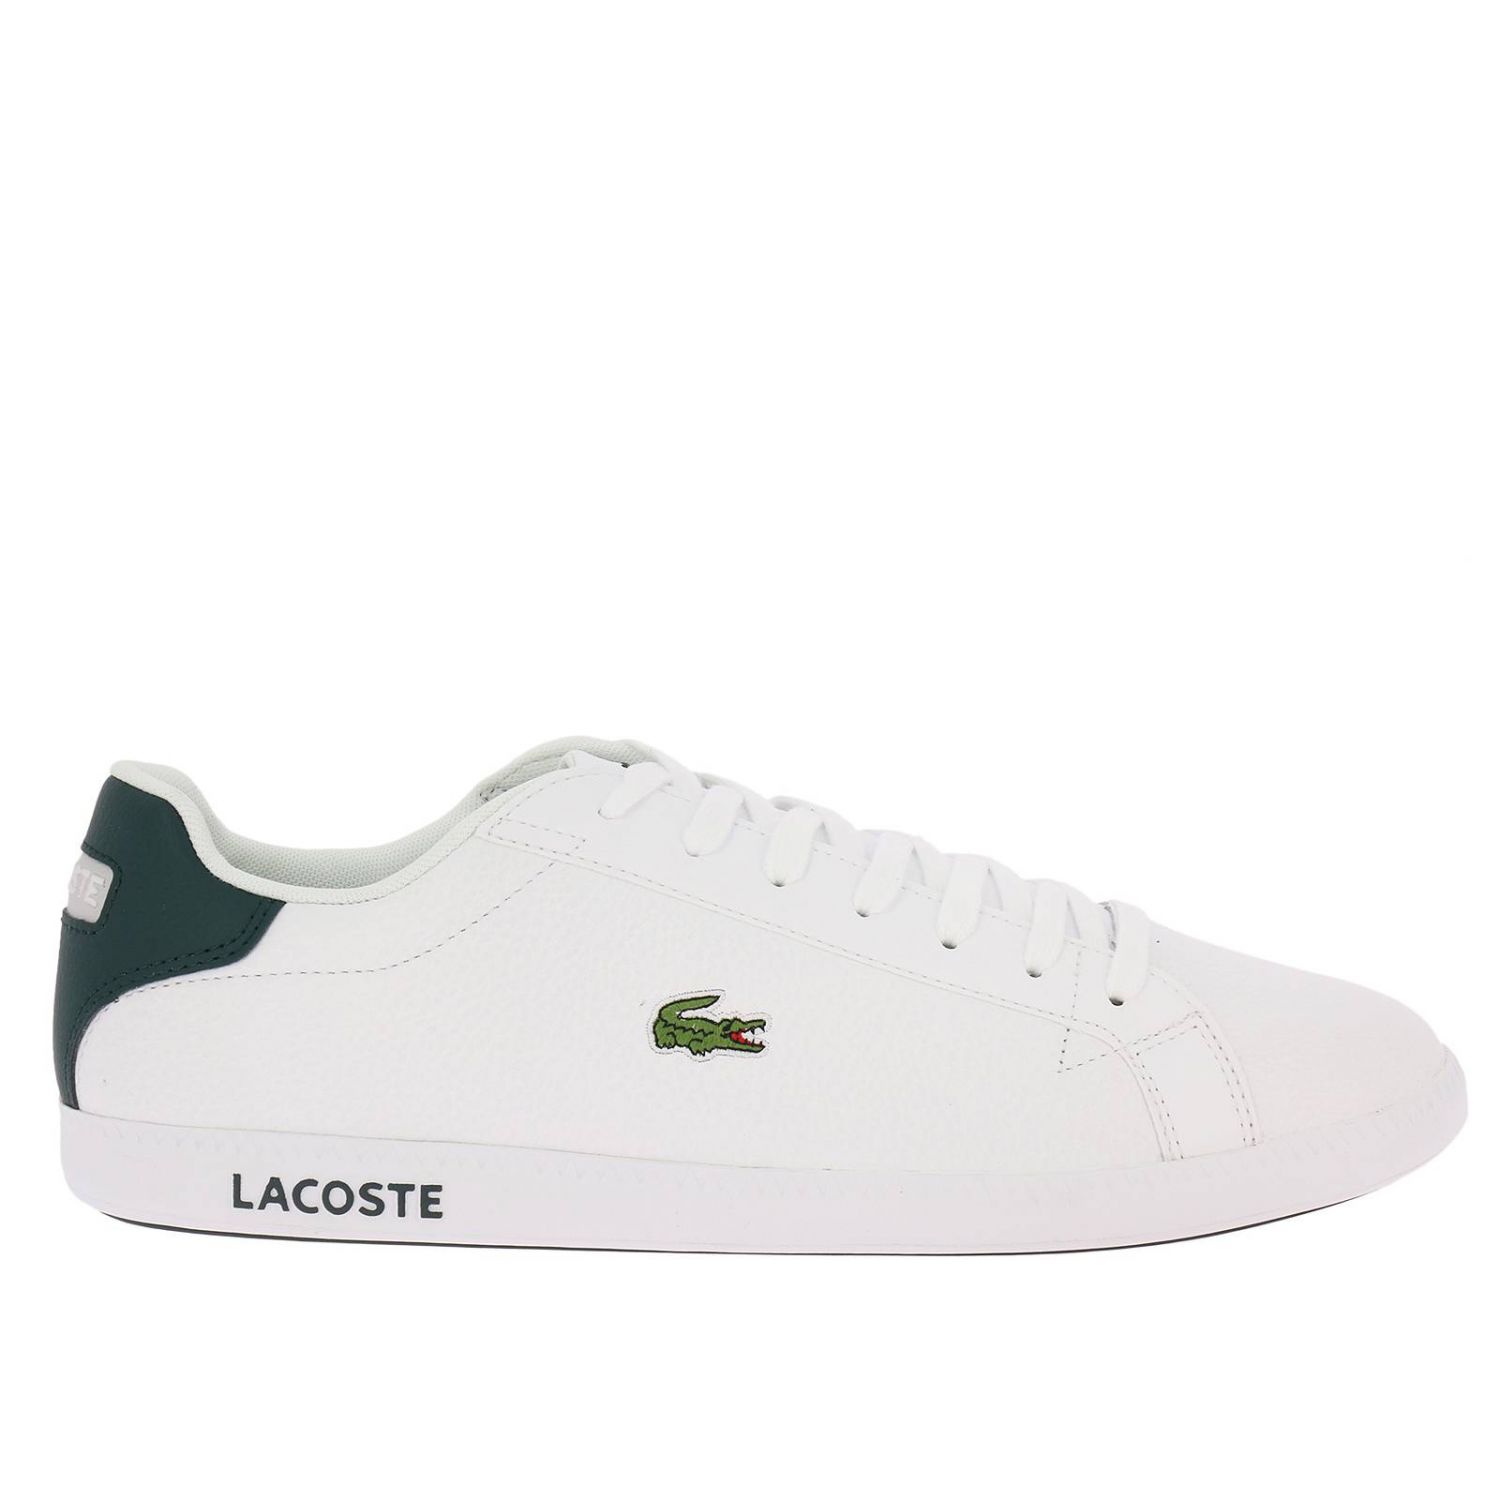 Lacoste Outlet: Shoes men - White | Sneakers Lacoste 735SPM0013 GIGLIO.COM